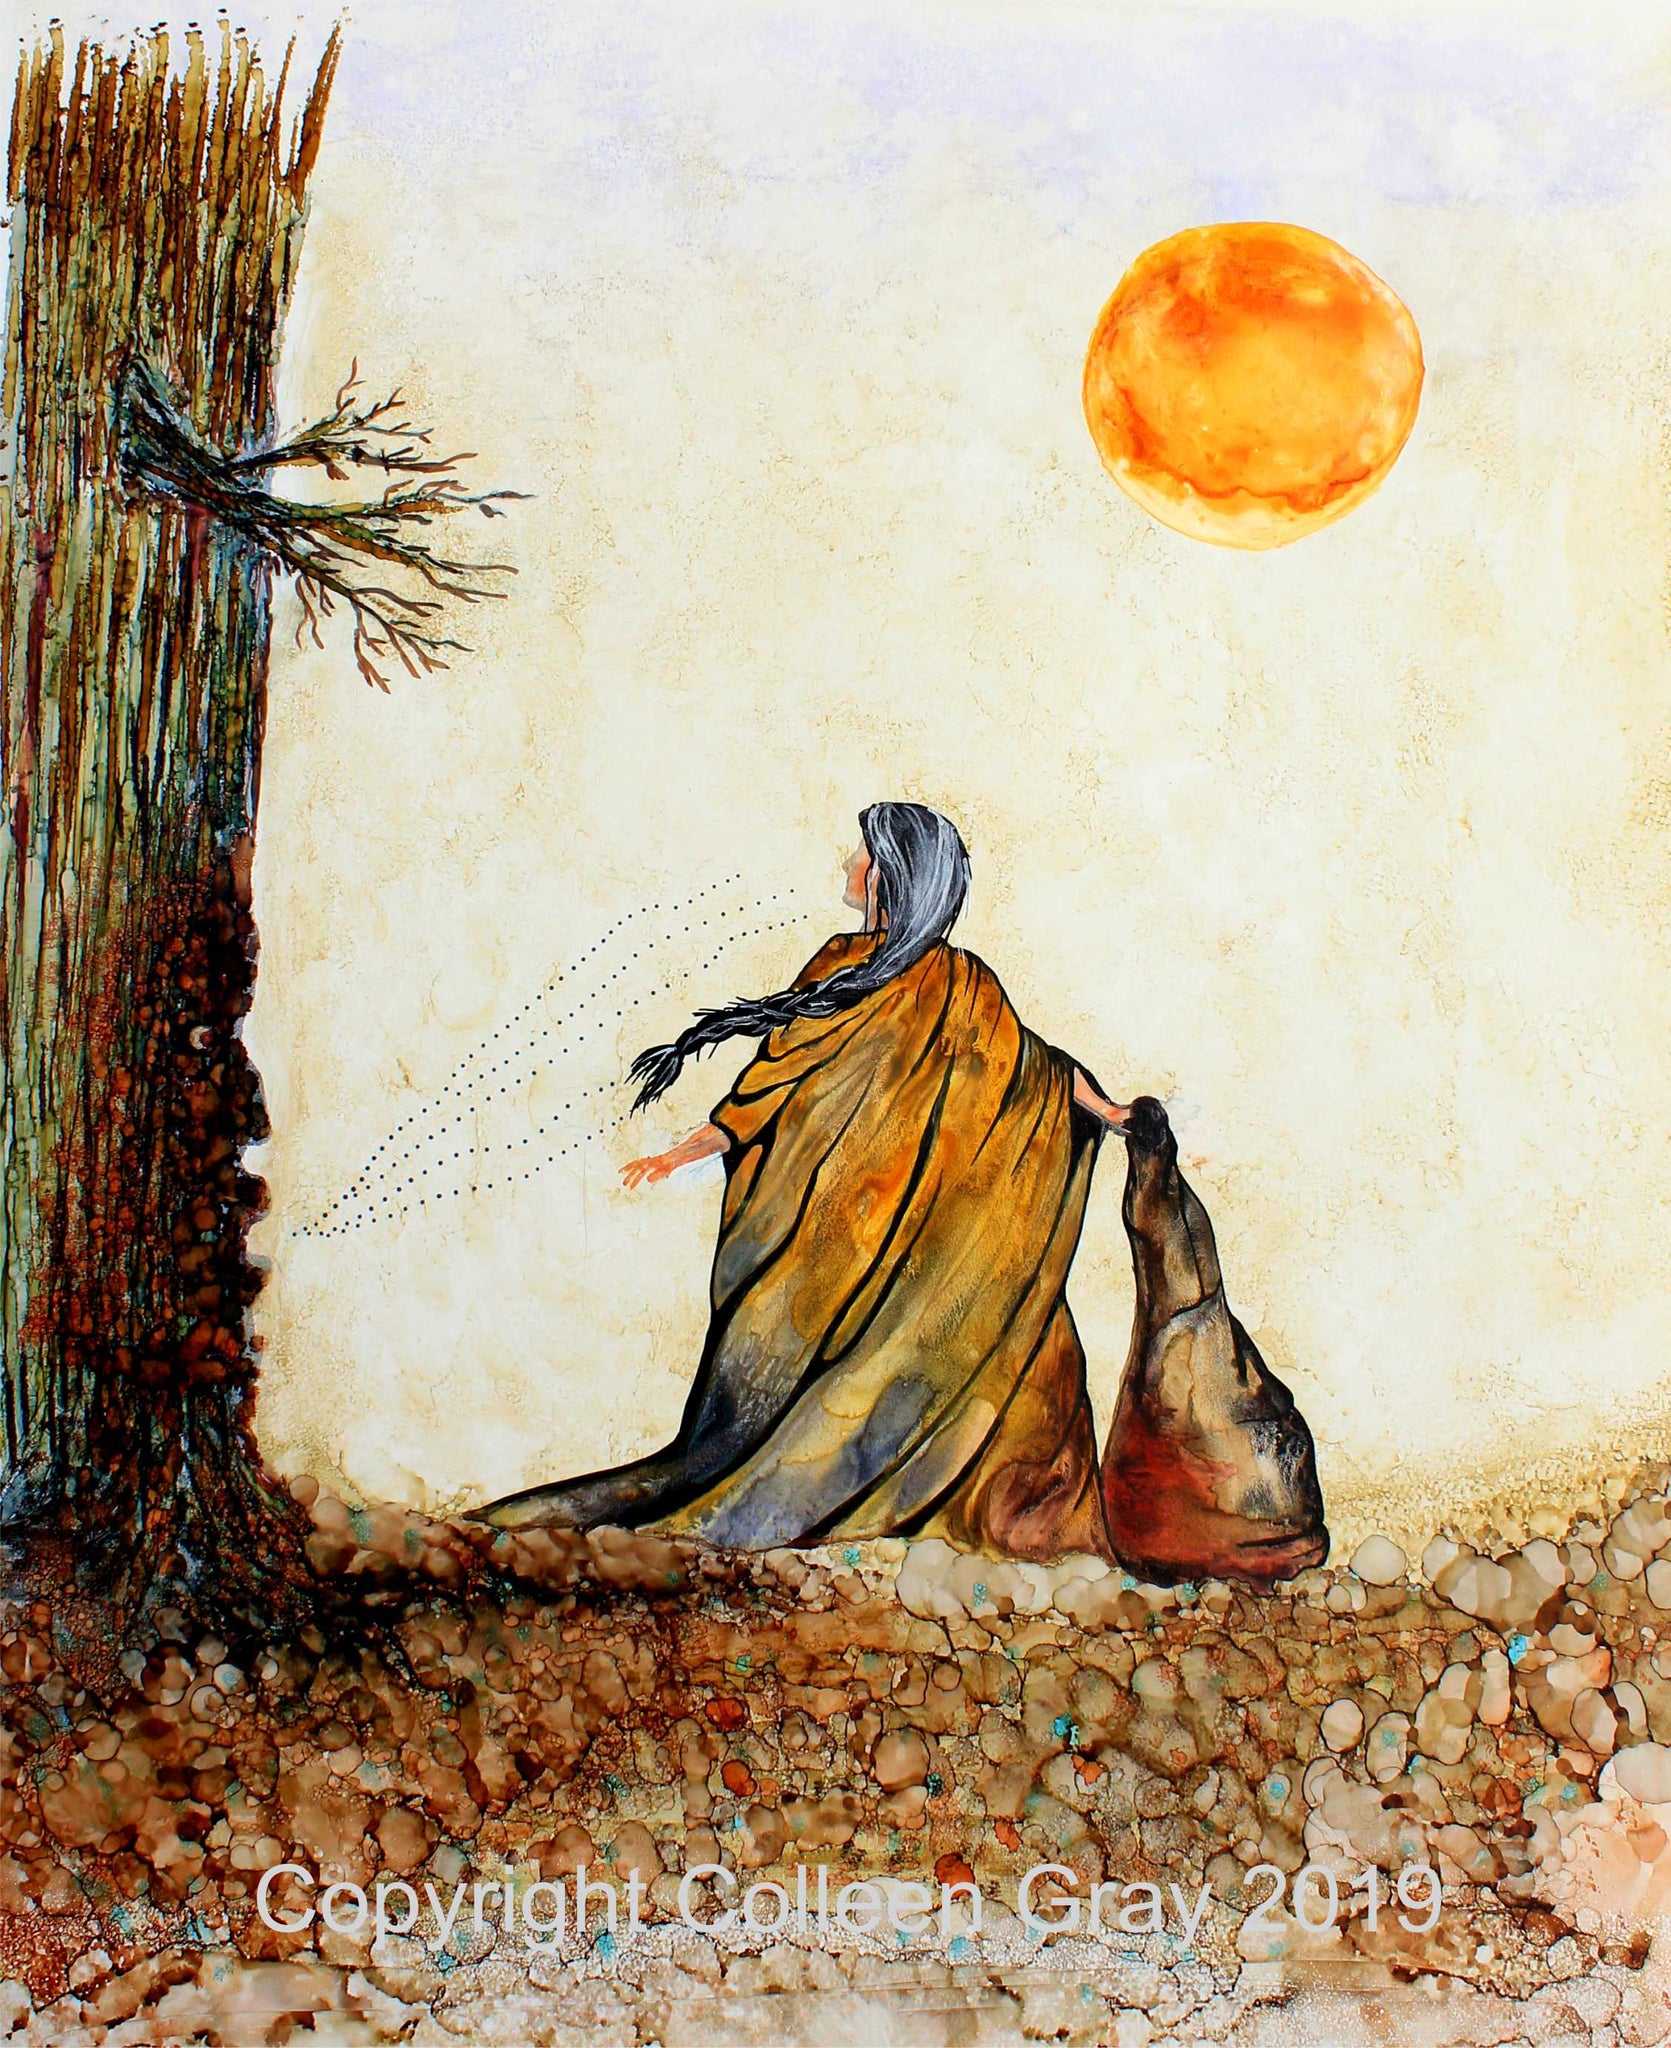 Image of Title: The Story Tree Art Card by Metis Artist Colleen Gray Indigenous Canadian Art Work. Woman with long hair standing before a big tree stories being told. Sun in sky. For sale at https://artforaidshop.ca